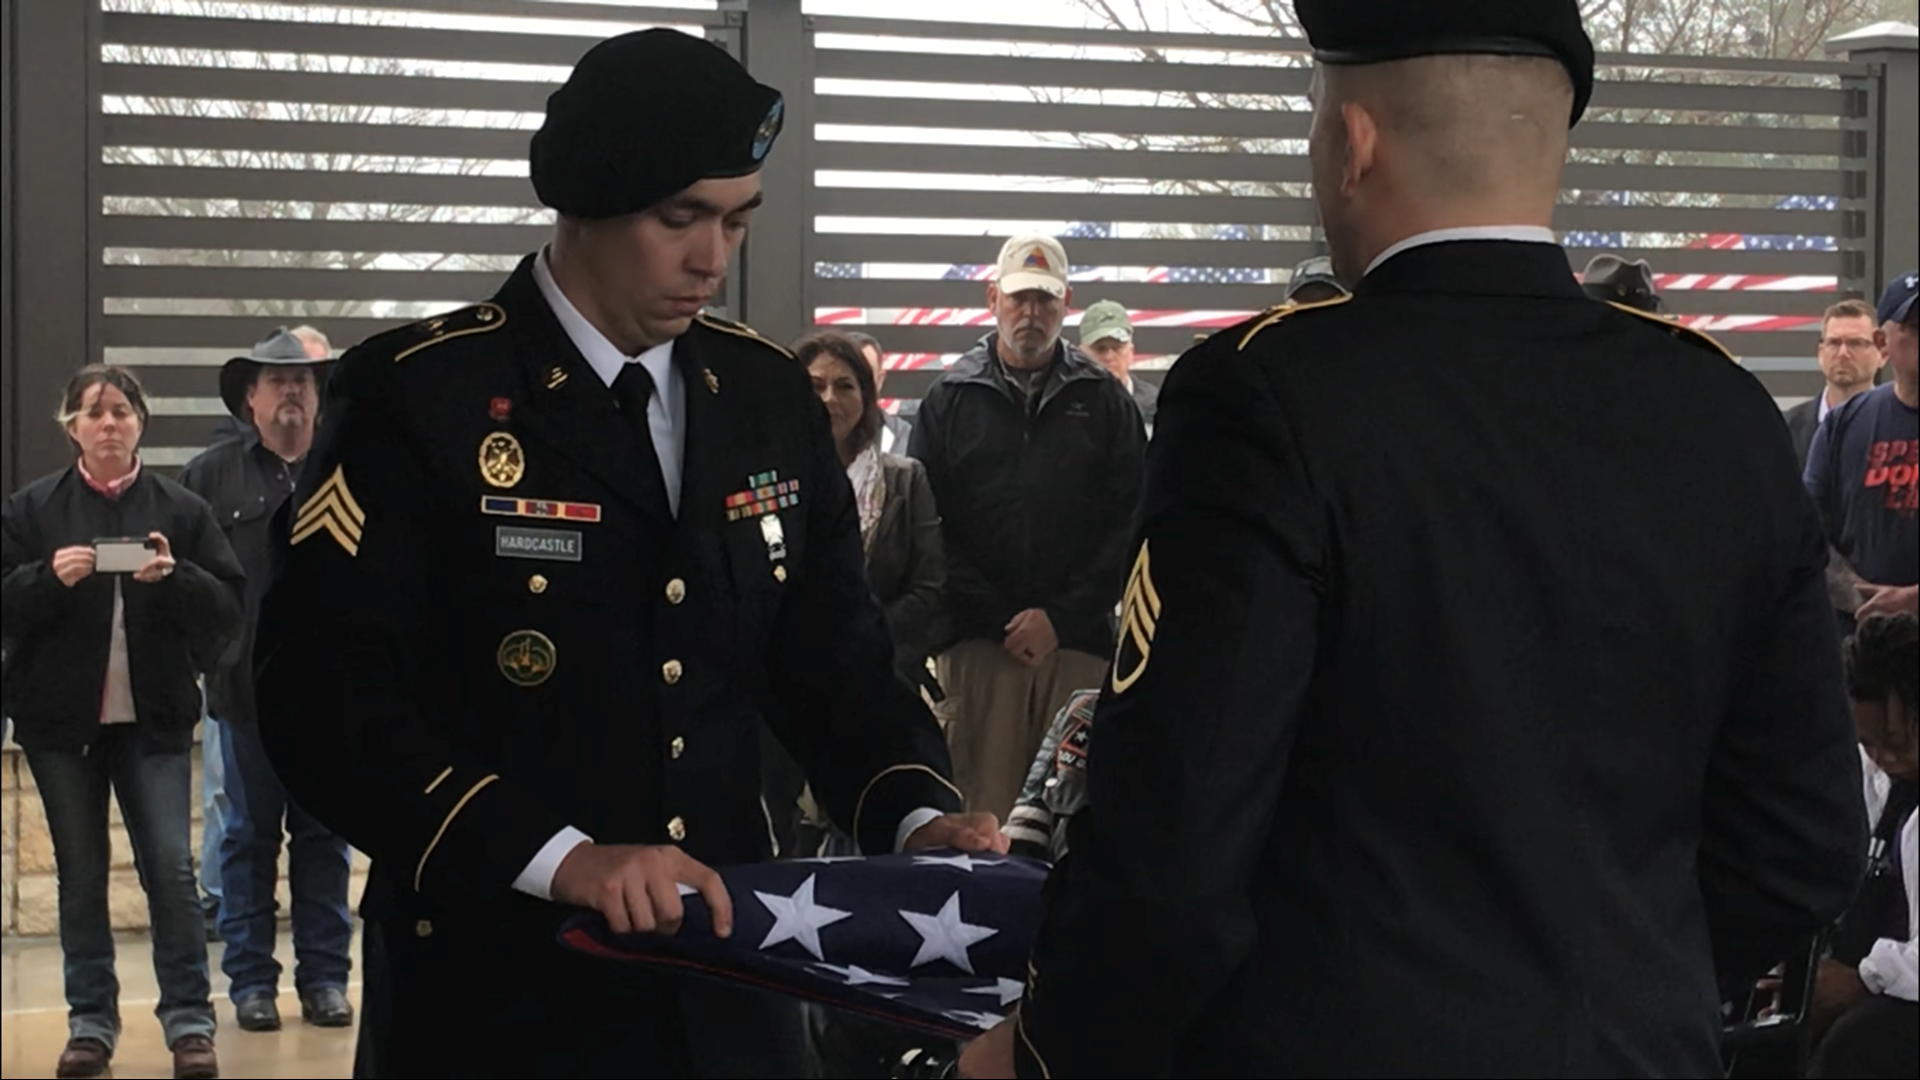 In its 100th burial, the Central Texas State Veterans Cemetery honored Major Lee Shotwell Jr., according to the Central Texas State Veterans Cemetery's Facebook page. An unaccompanied veteran is defined as a service member who has no next of kin.